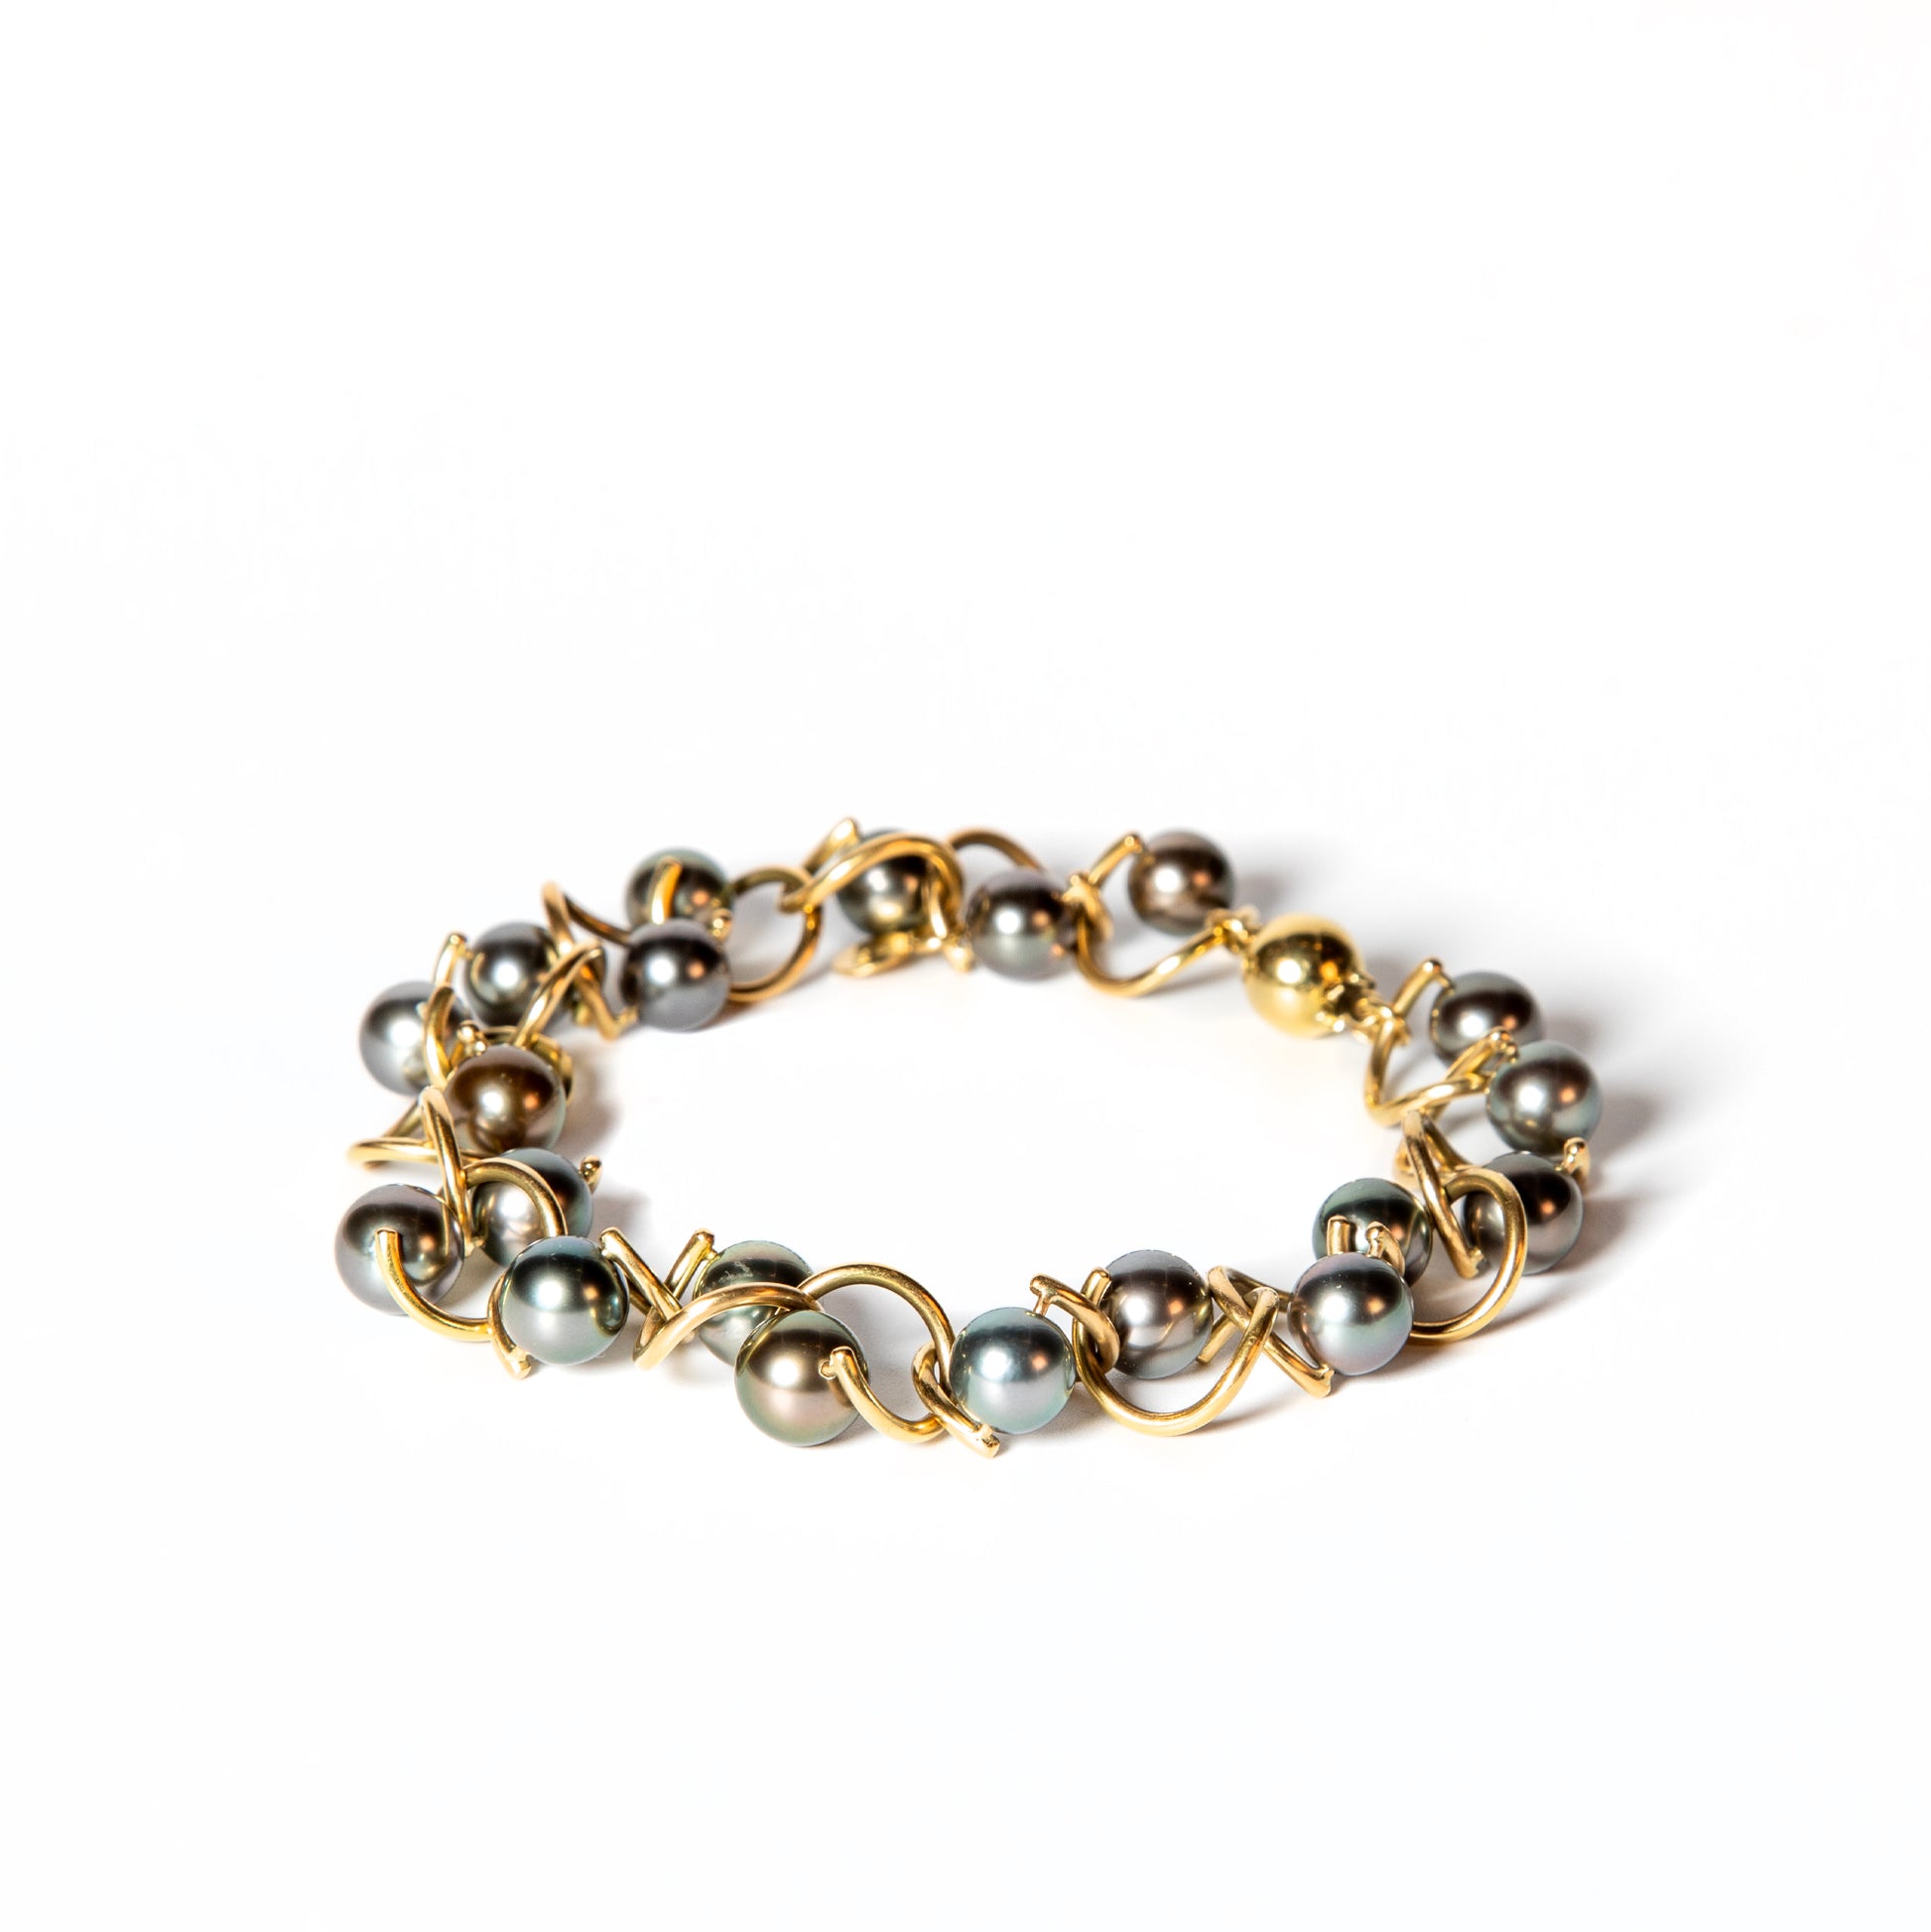 Green pearls and gold twist series bracelet by Sofie Lunoe pictured closed